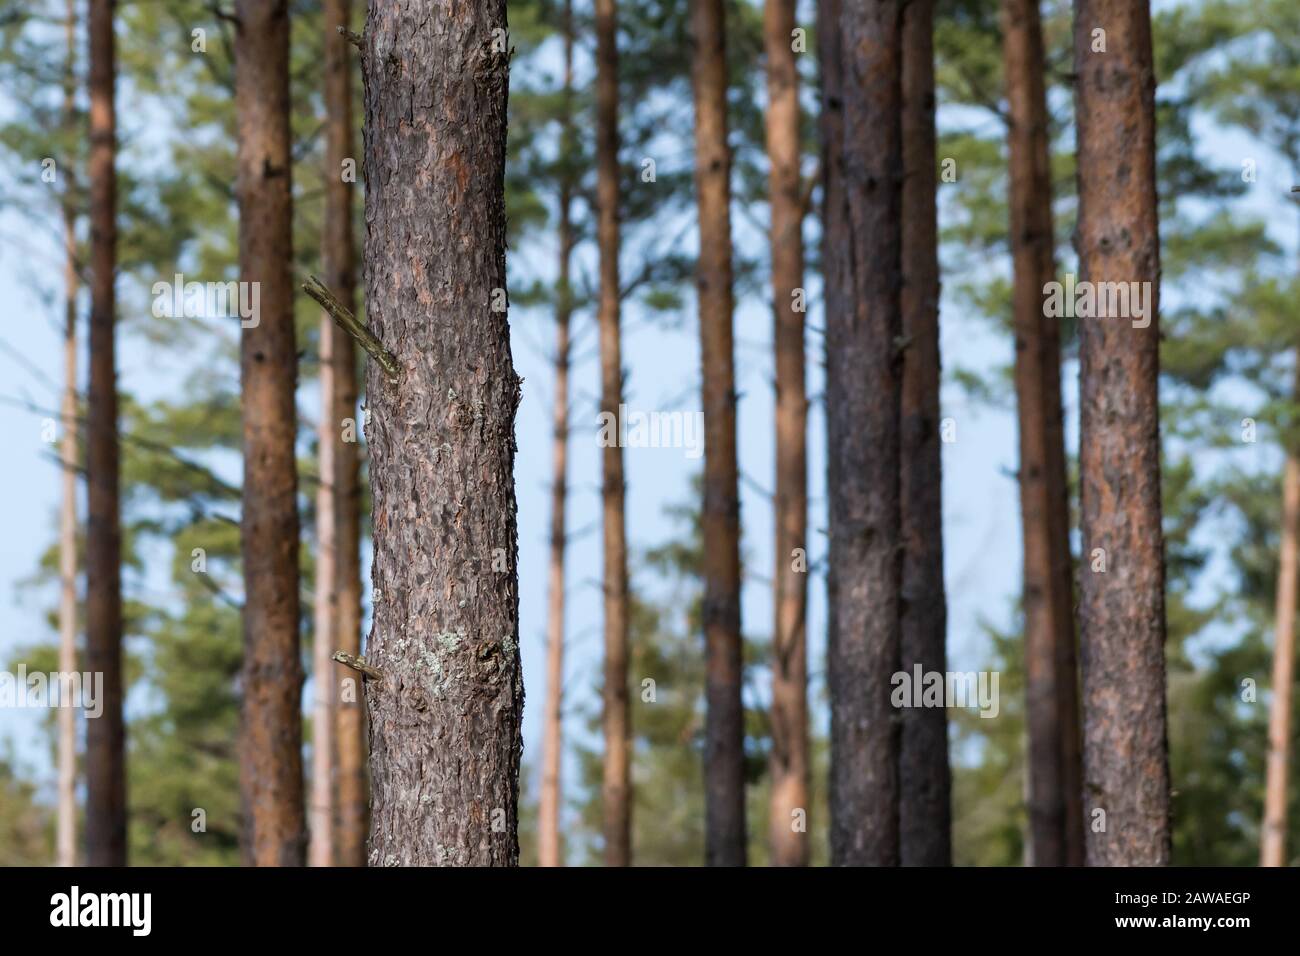 Focus on one pine tree trunk in a bright forest by a blue sky Stock Photo